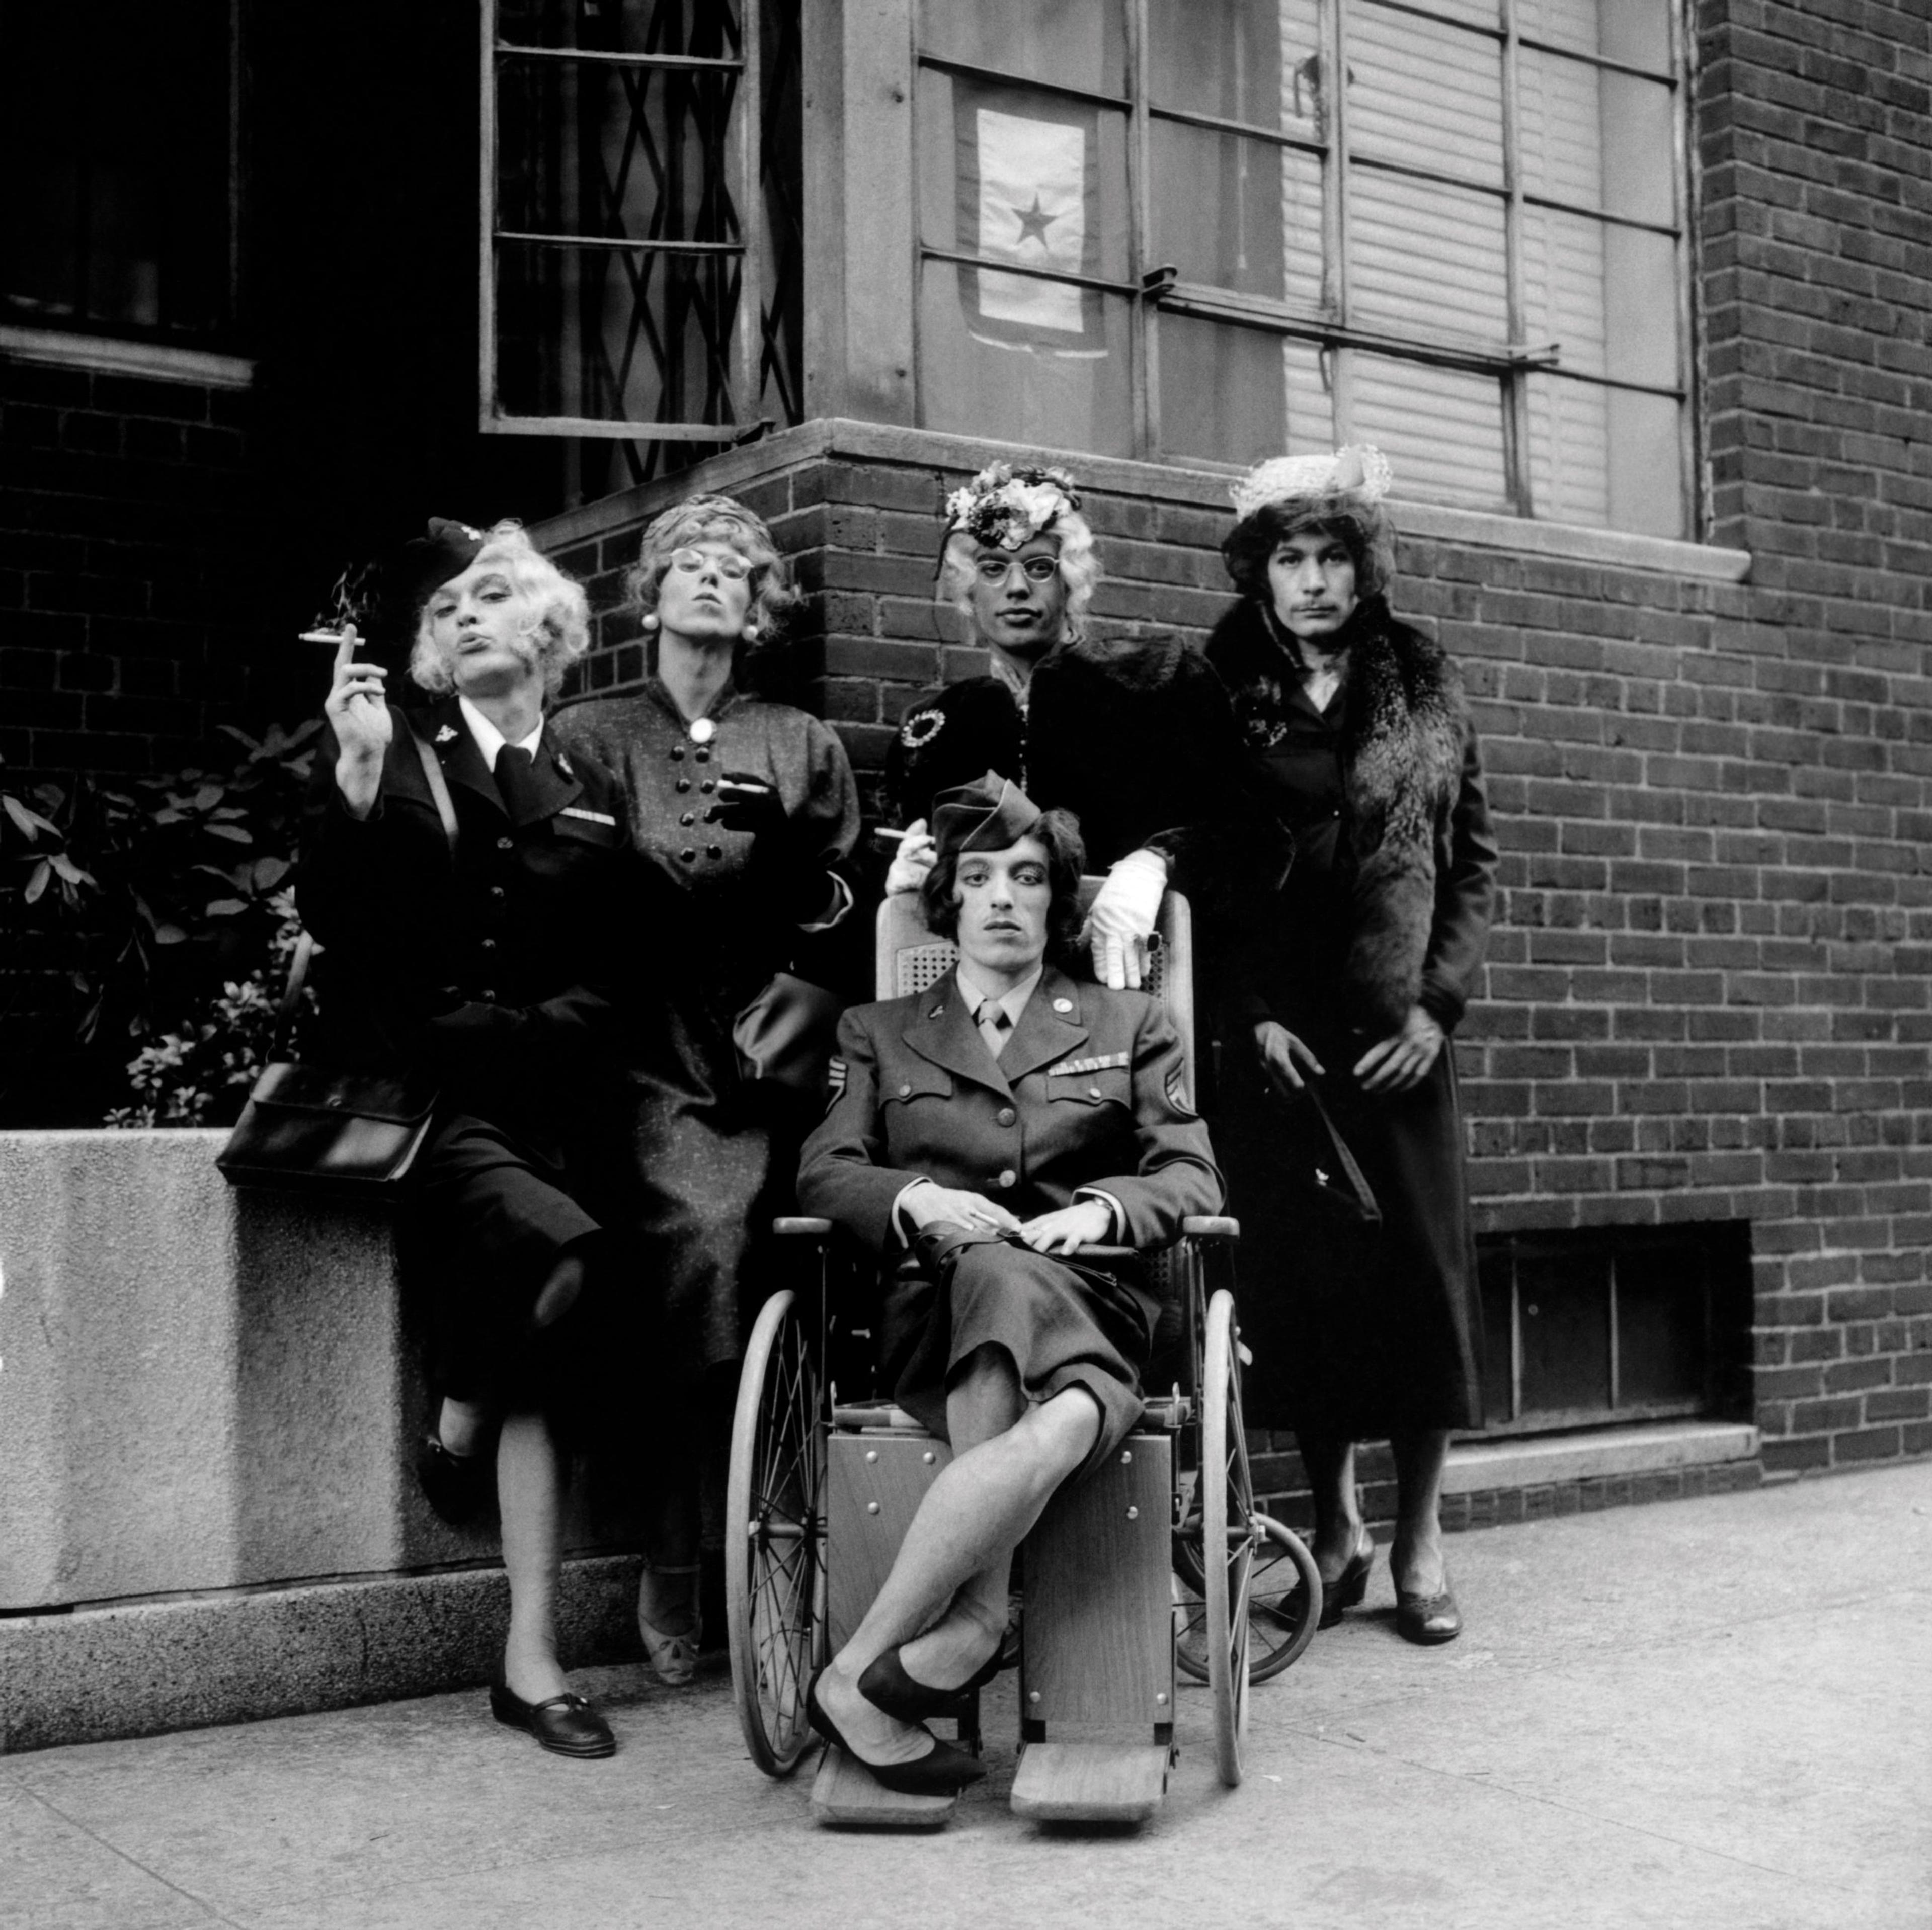 A black-and-white photograph of a group of men in drag on a city street